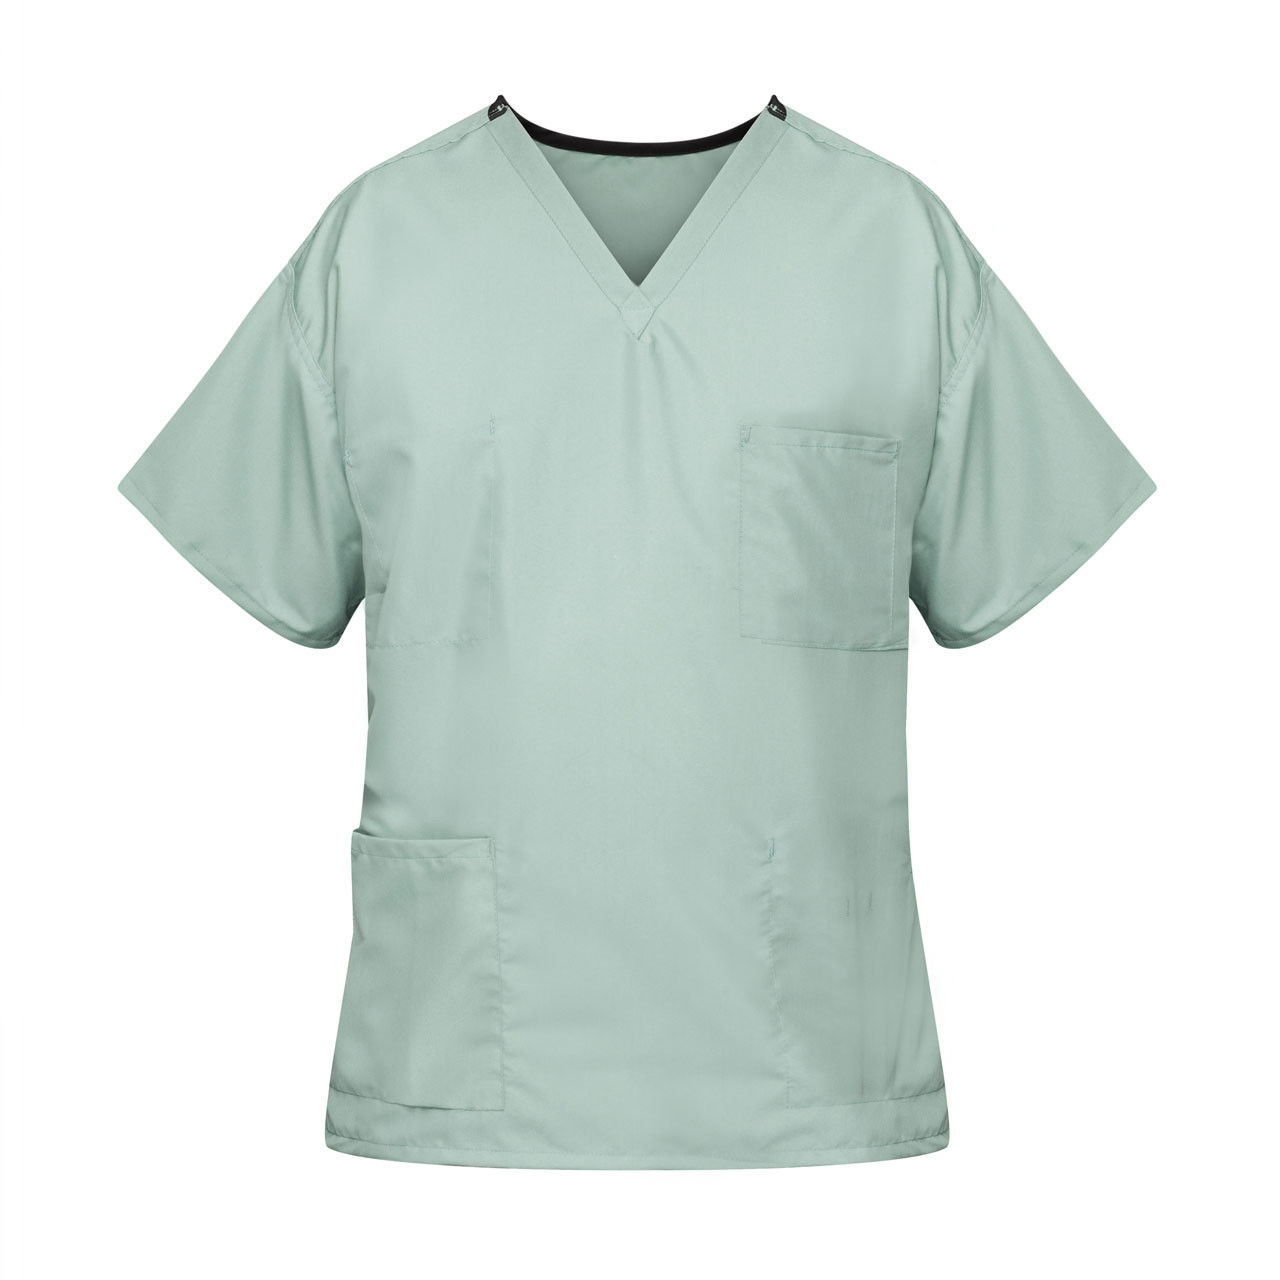 Unisex Reversible Scrub Top, Misty Green - Case of 24 Questions & Answers